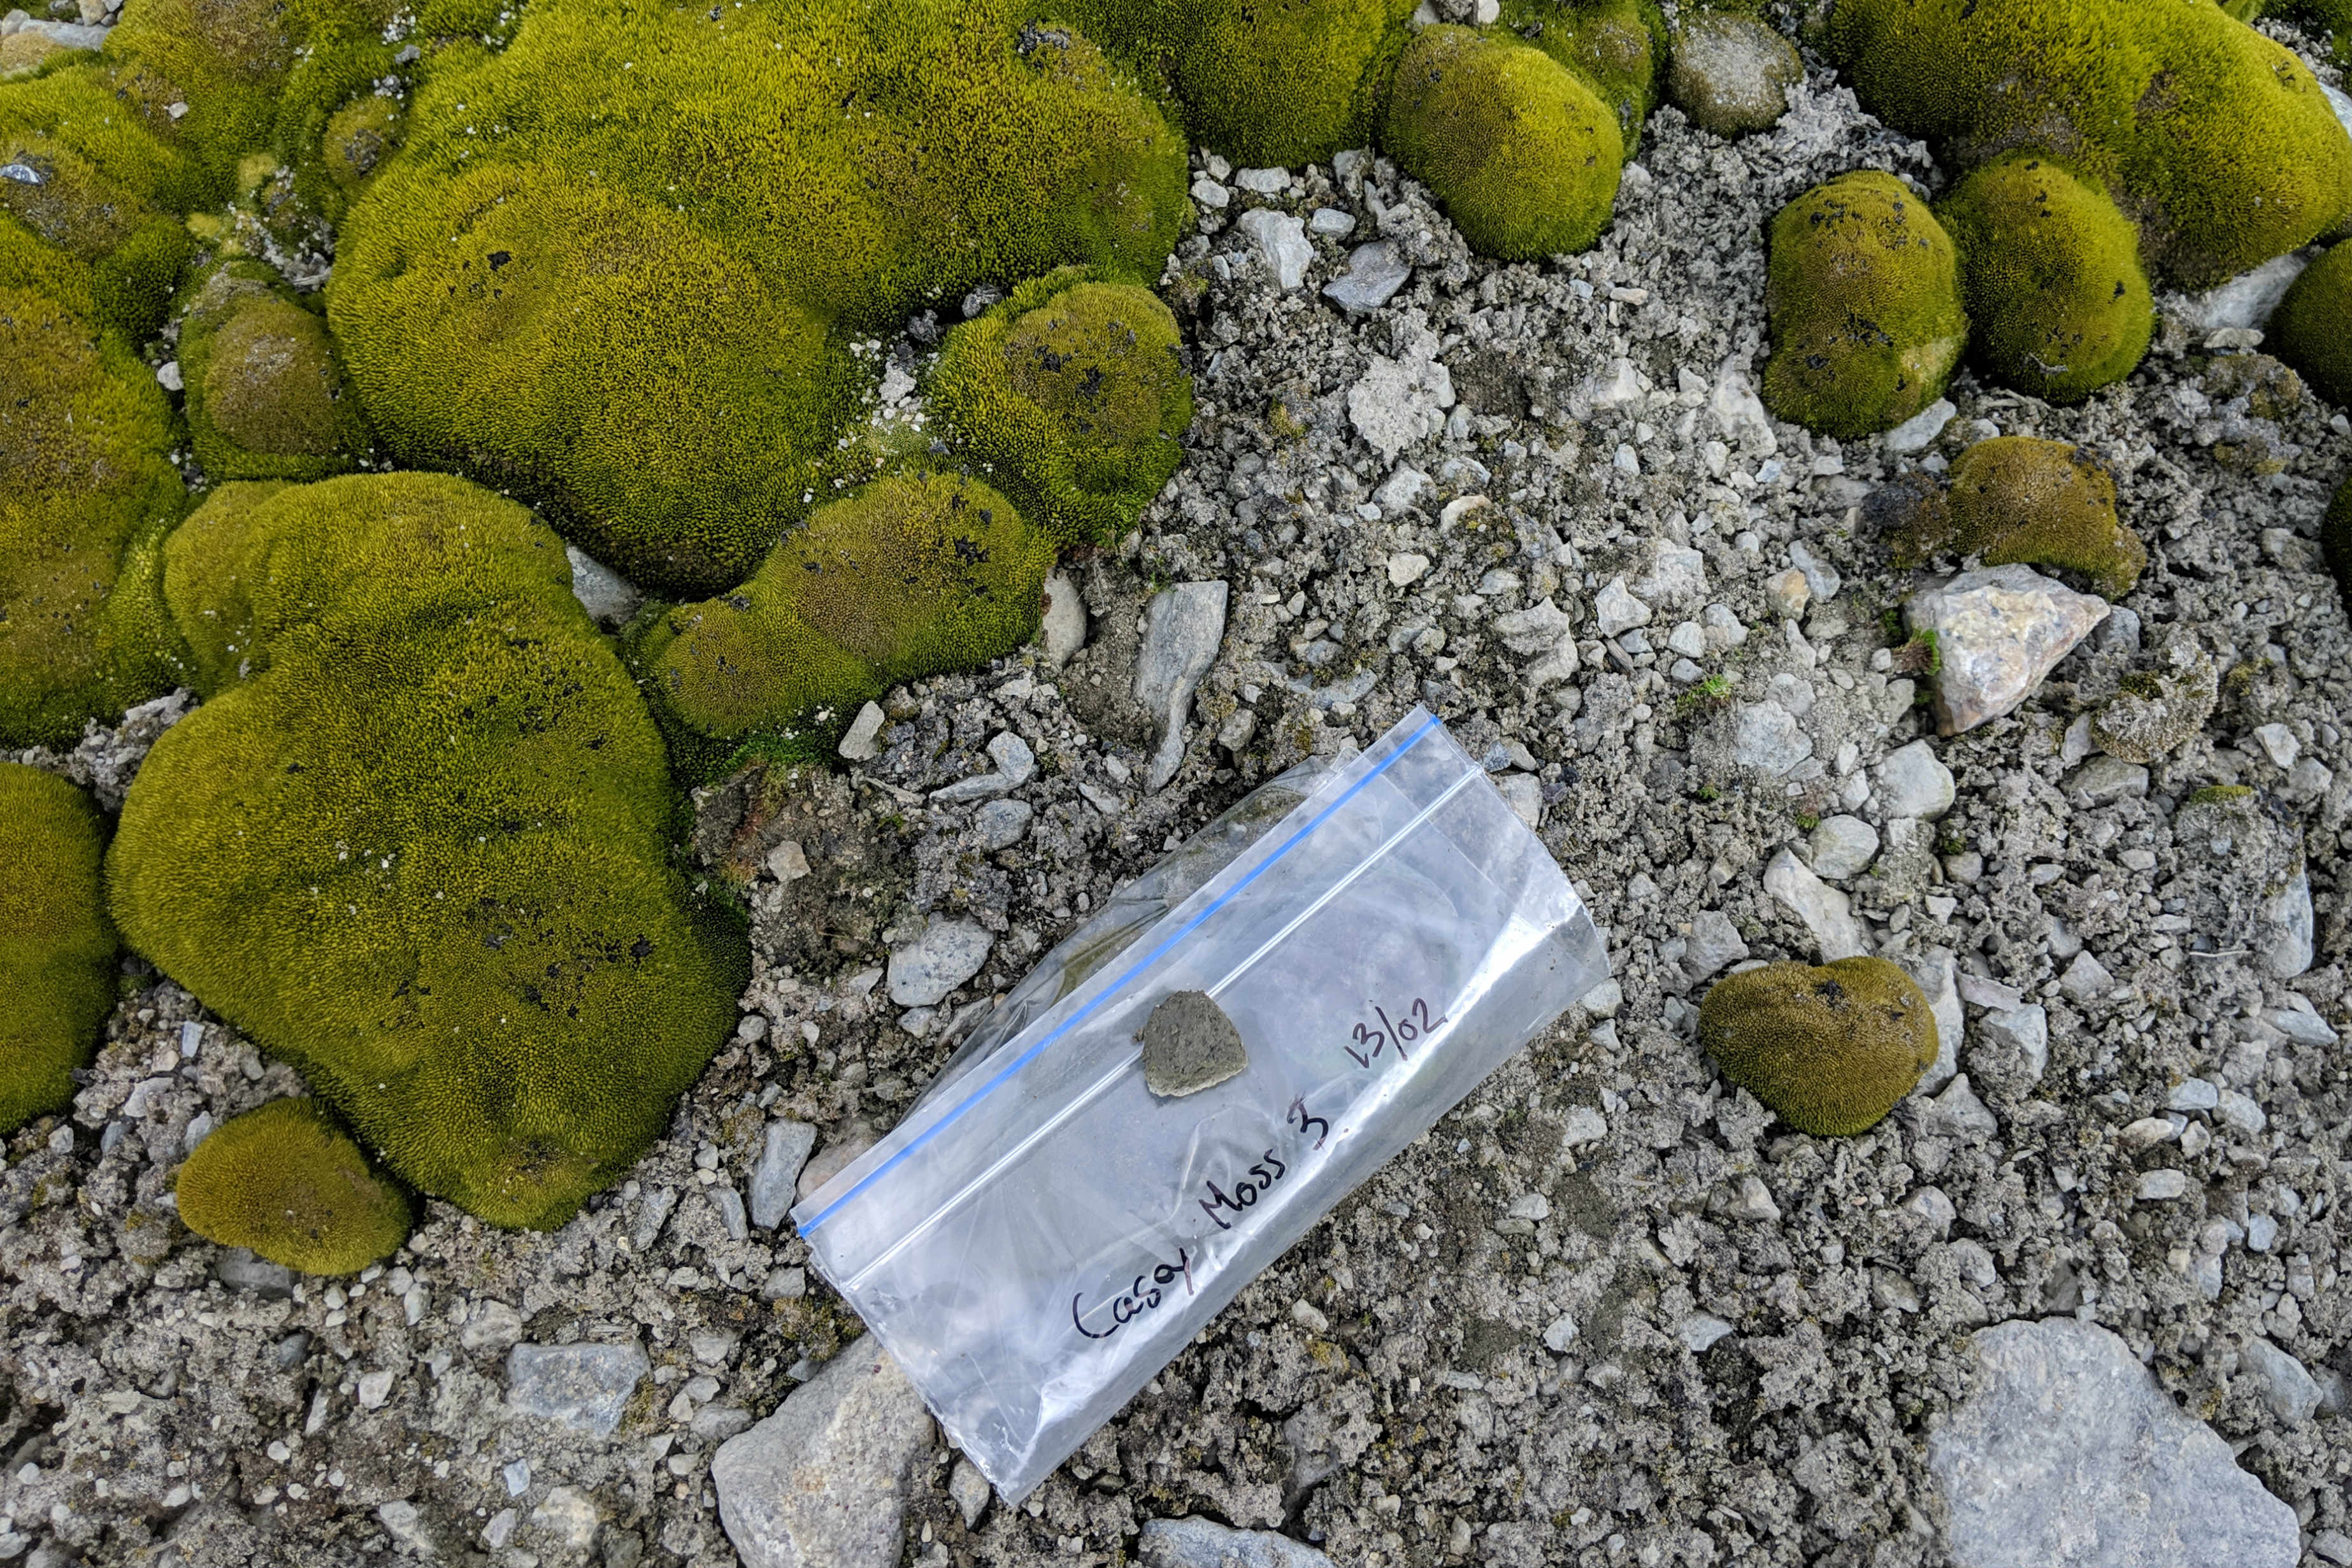 Photo of moss and a soil sample in a ziplock bag